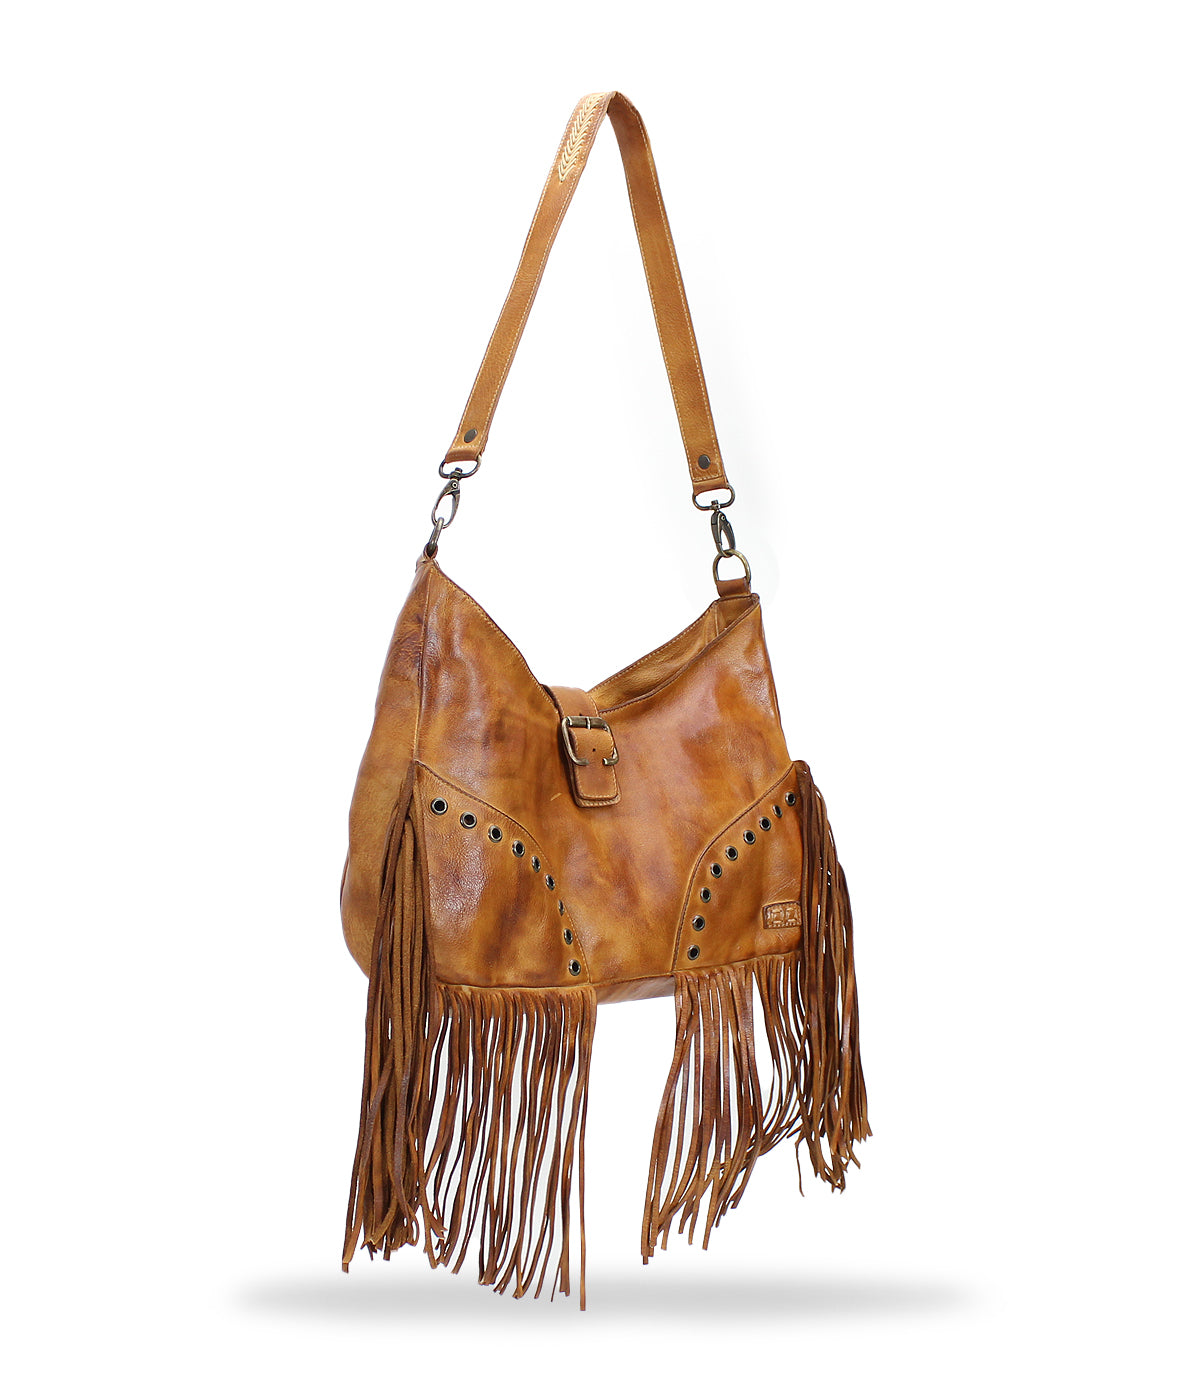 A vintage-inspired Advice leather bag with fringes by Bed Stu.